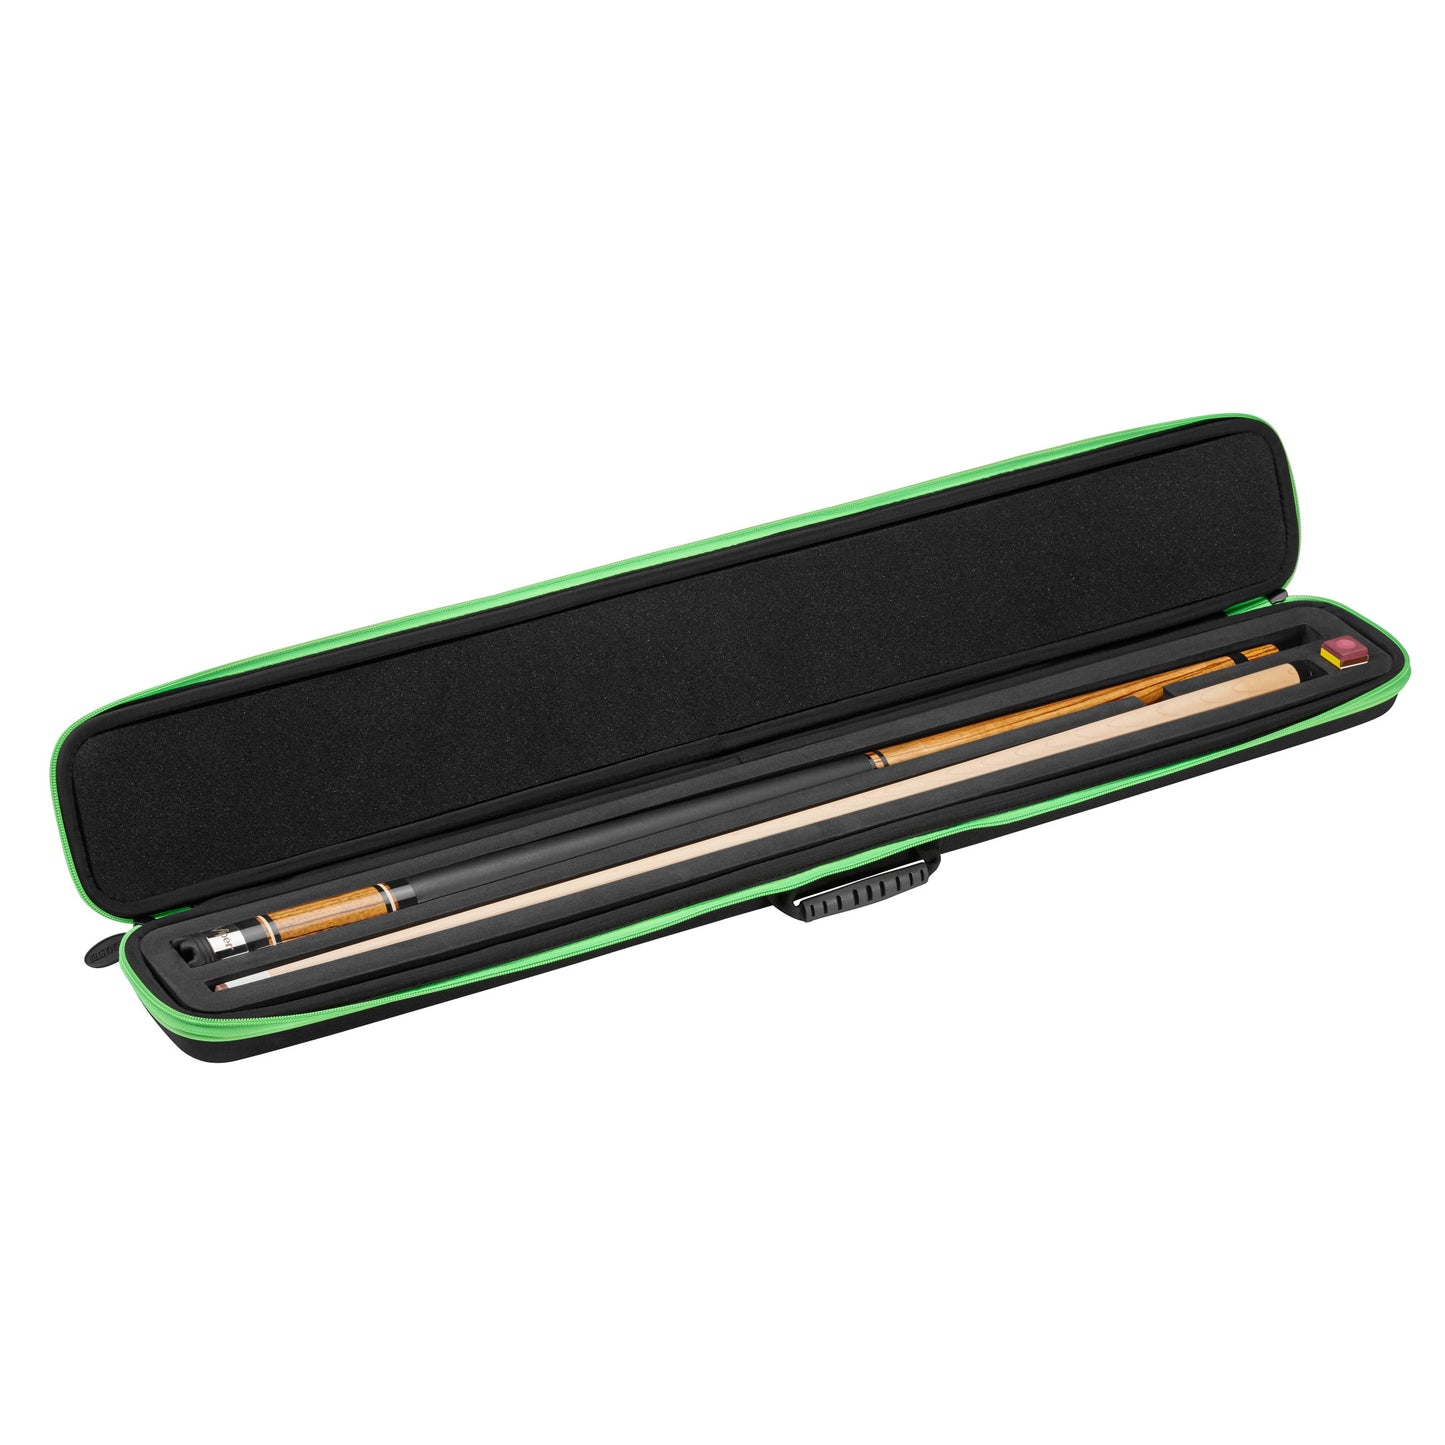 Casemaster Parallax Cue Case Green opened showing 2 cue sticks and chalk inside